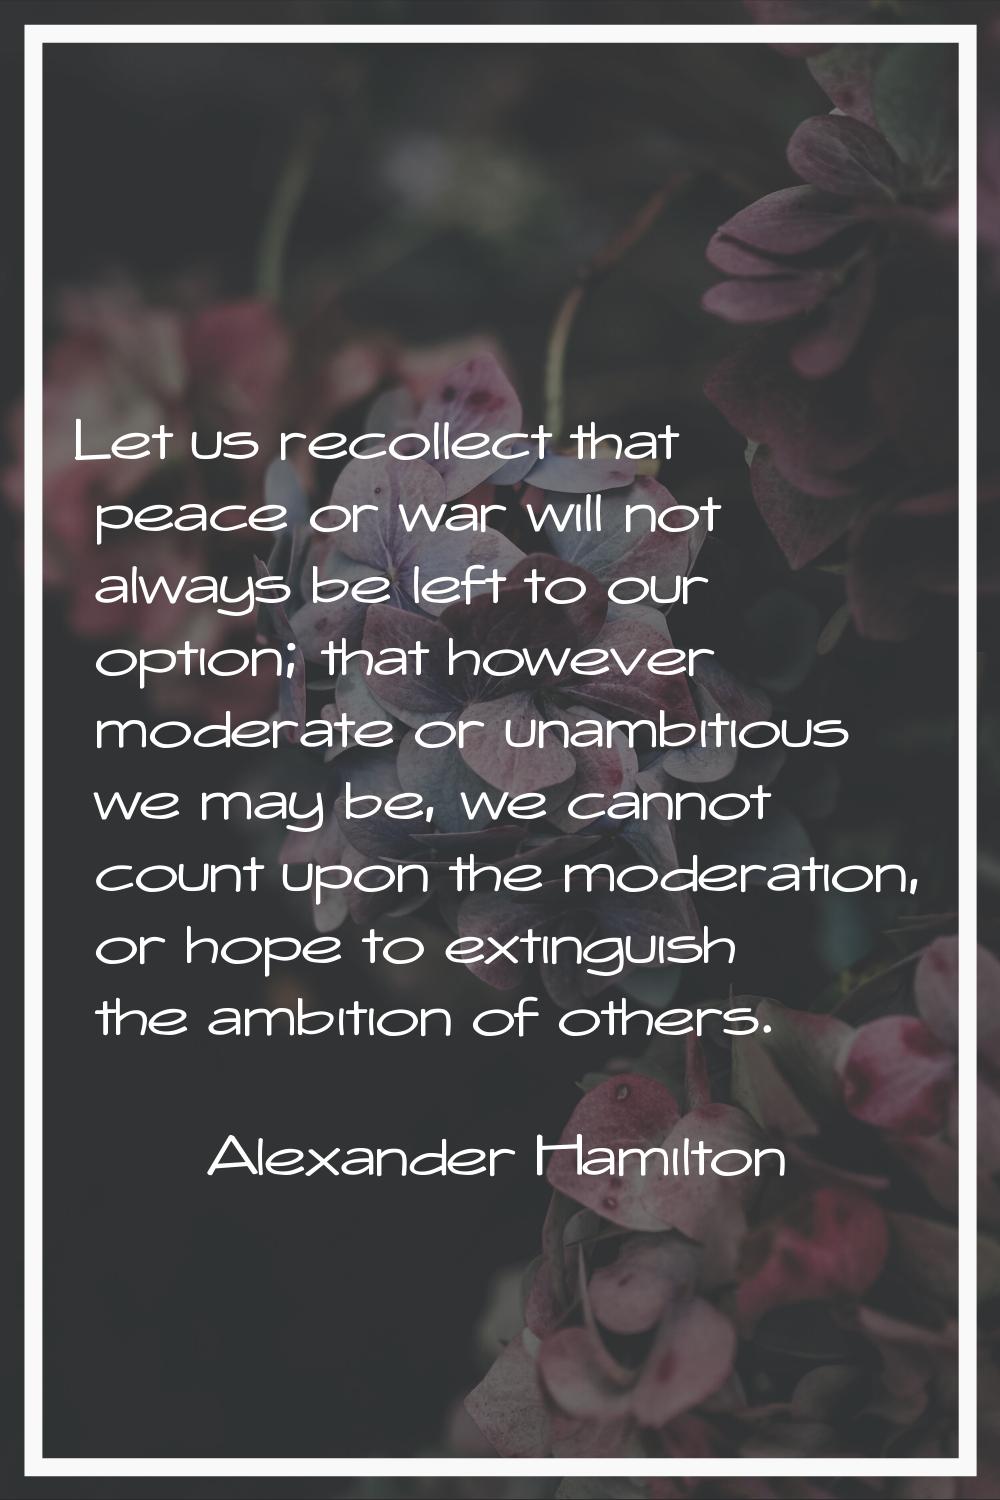 Let us recollect that peace or war will not always be left to our option; that however moderate or 